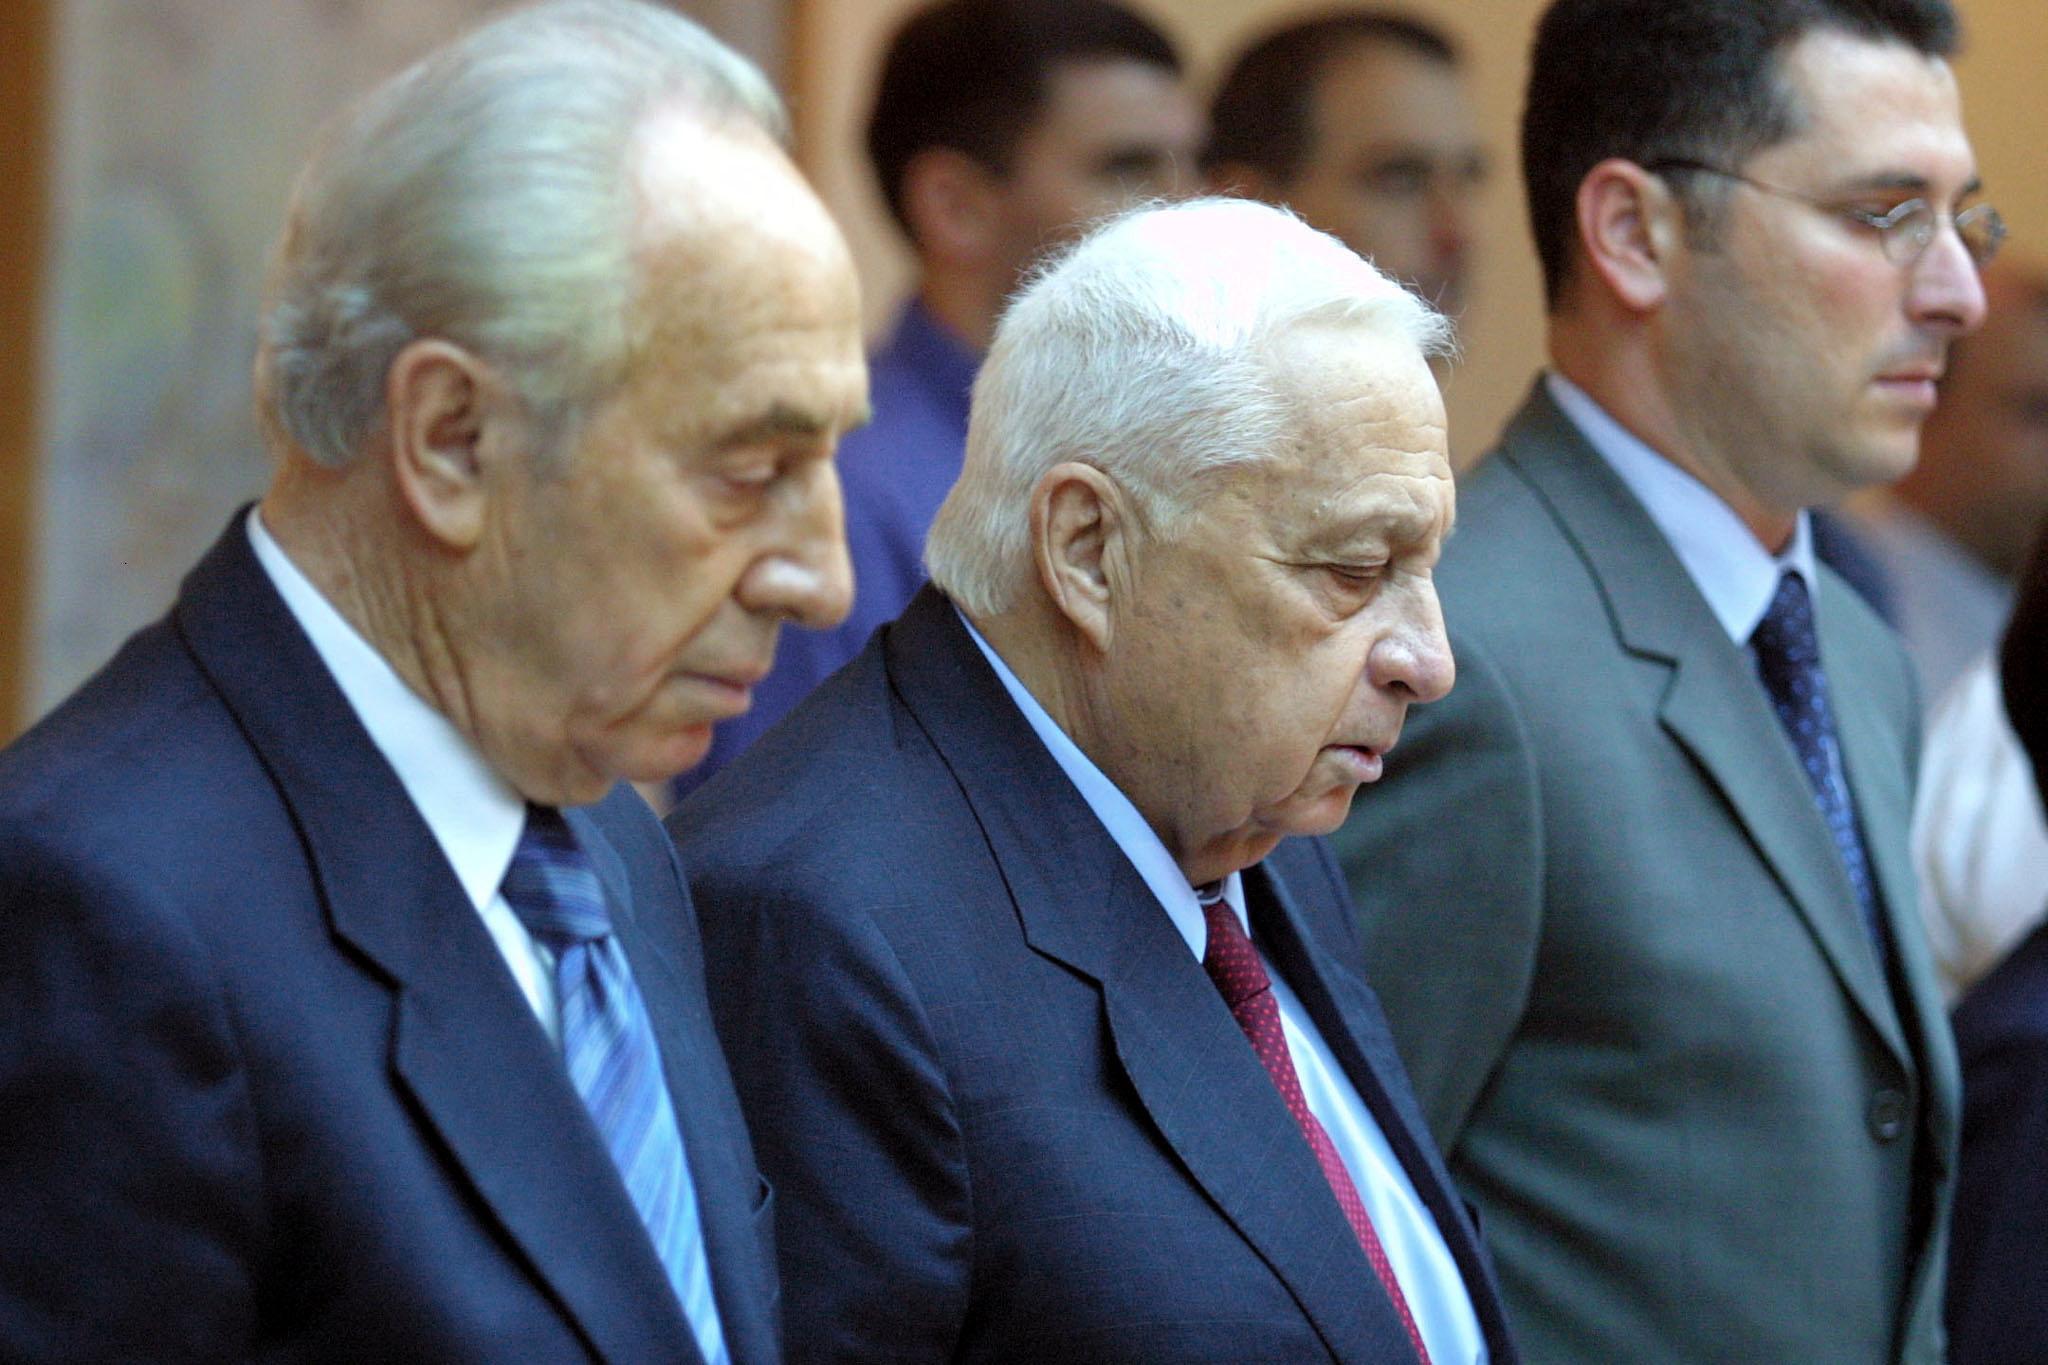 Ariel Sharon (C), Shimon Peres (L) and Gideon Saar observe a minute of silence for the victims of the 11 September 2001 attack (AFP/file photo)